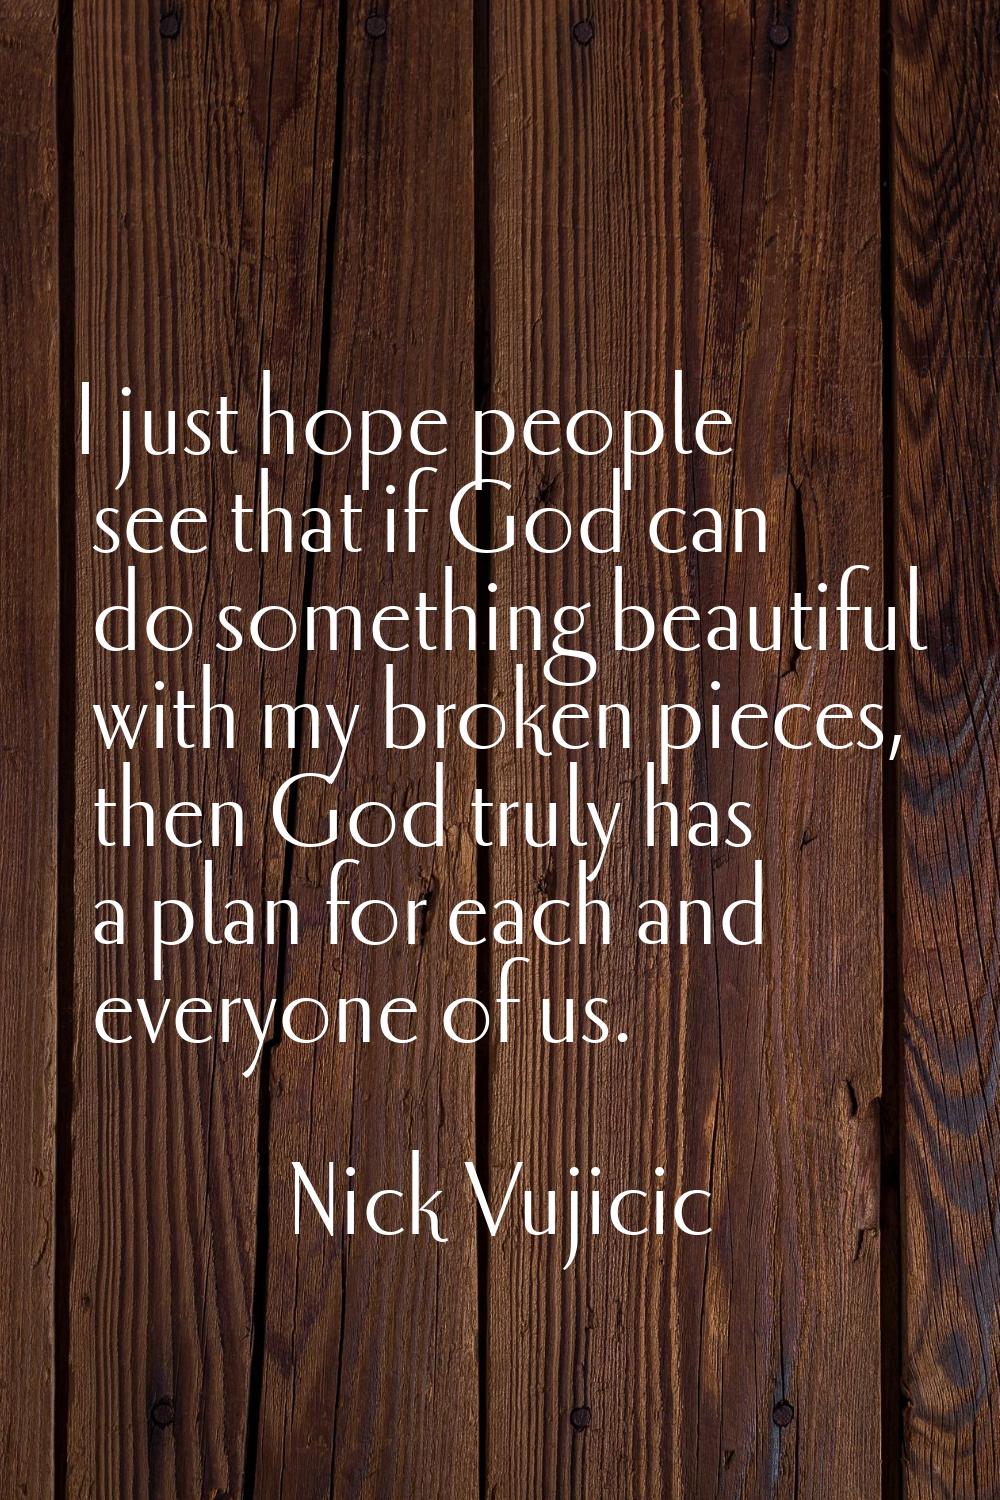 I just hope people see that if God can do something beautiful with my broken pieces, then God truly